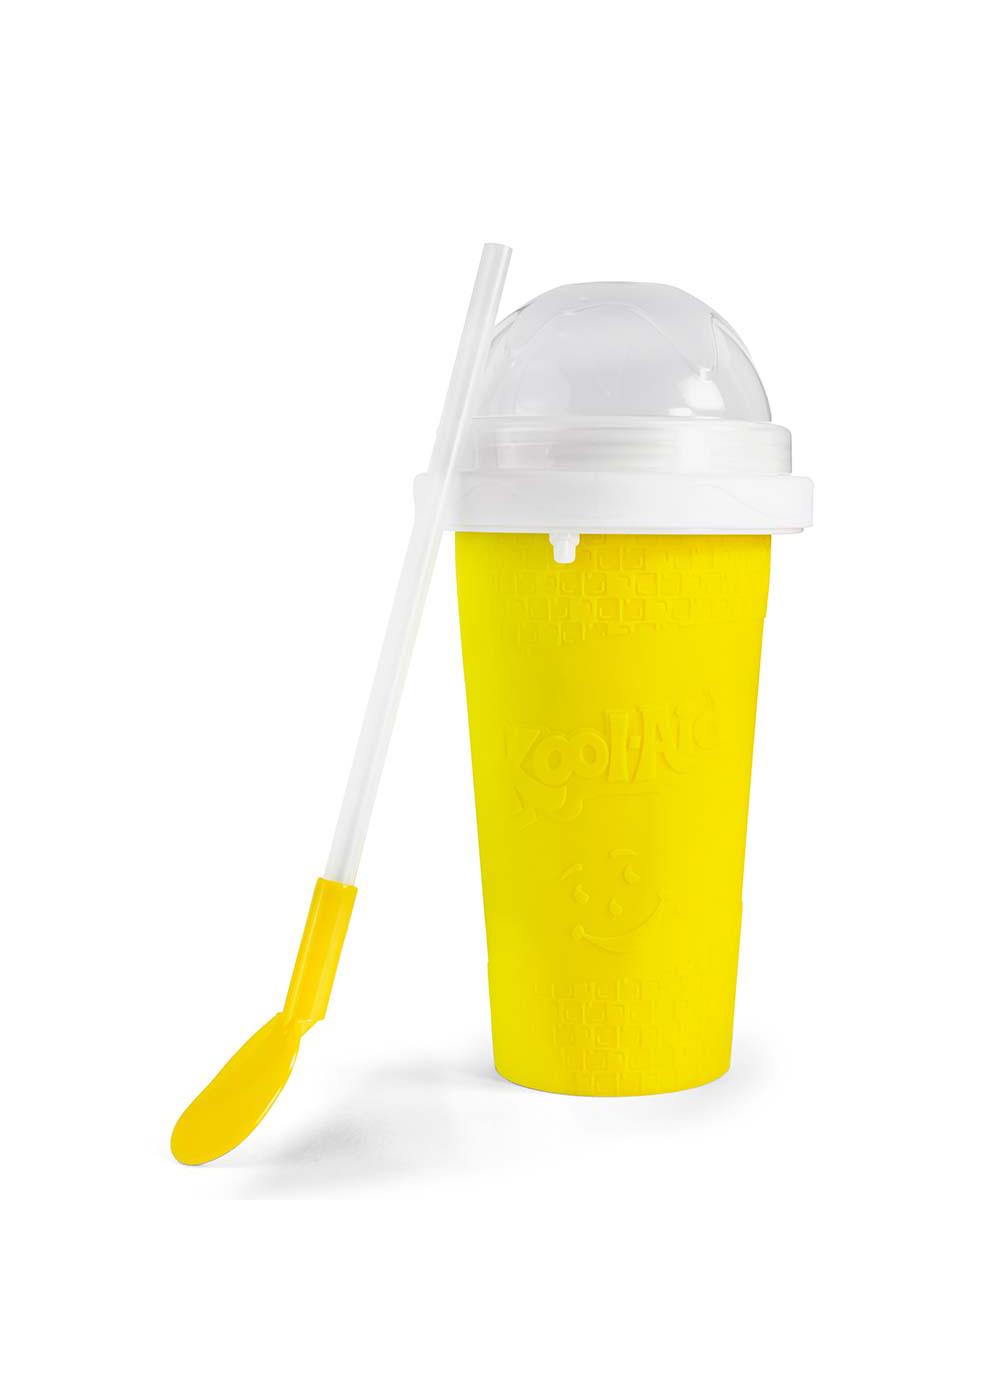 Kool-Aid Squeezy Slush Cup - Yellow; image 1 of 6